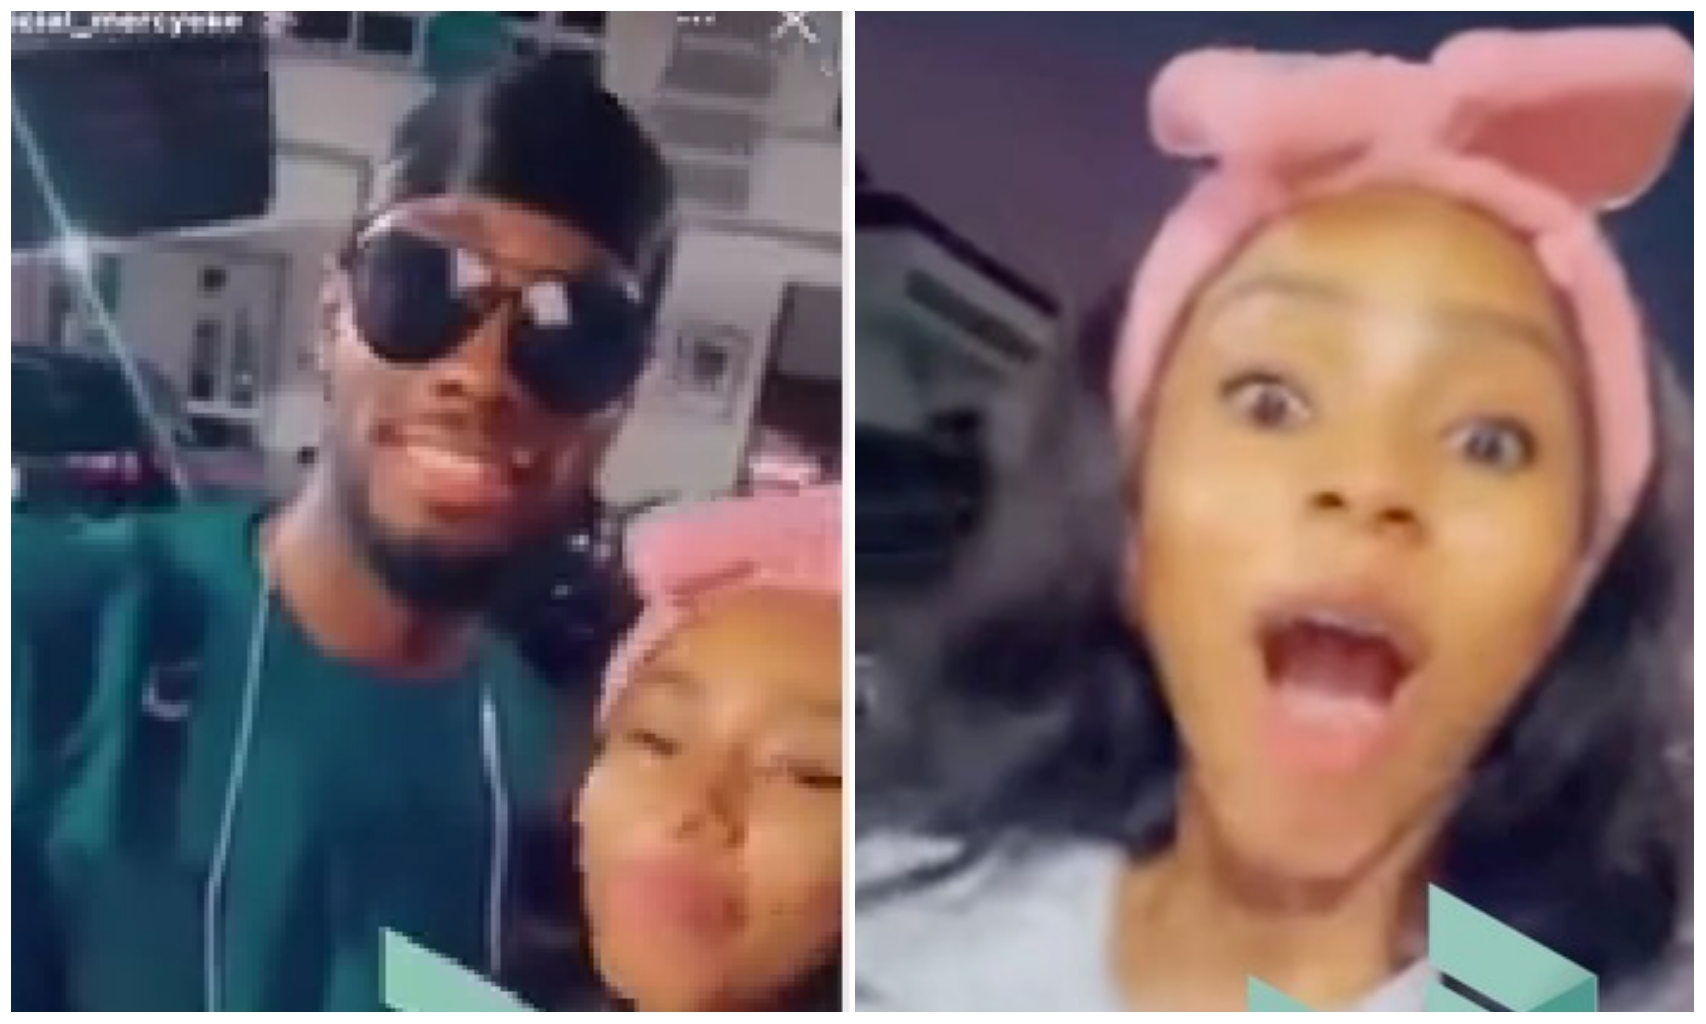 #BBNaija: You too fine, you too sweet – Mercy declares Prince as the sweetest man (Video)